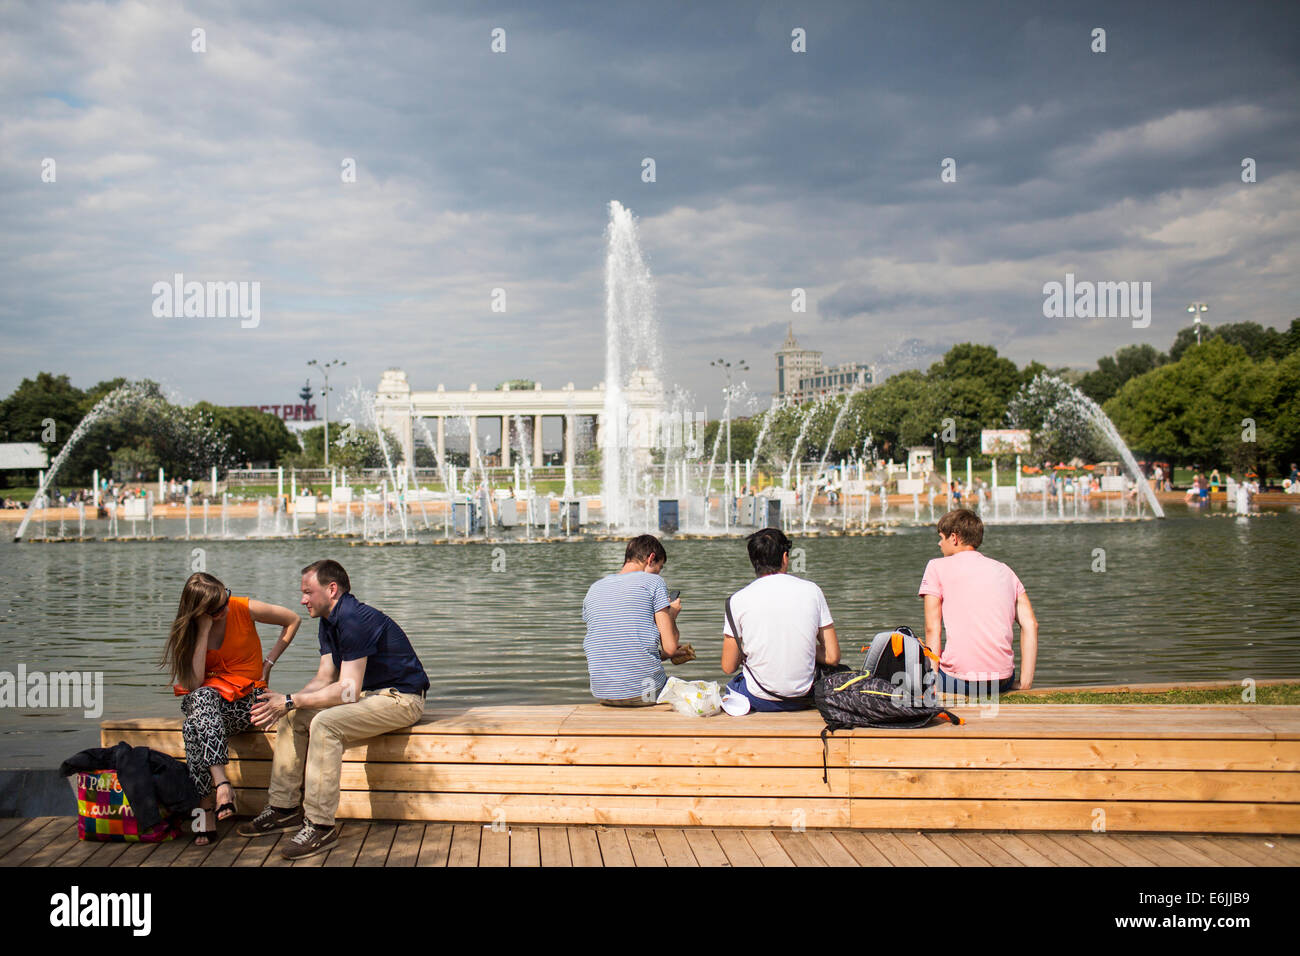 Fountain in water at Gorky Park, Moscow, Russia Stock Photo